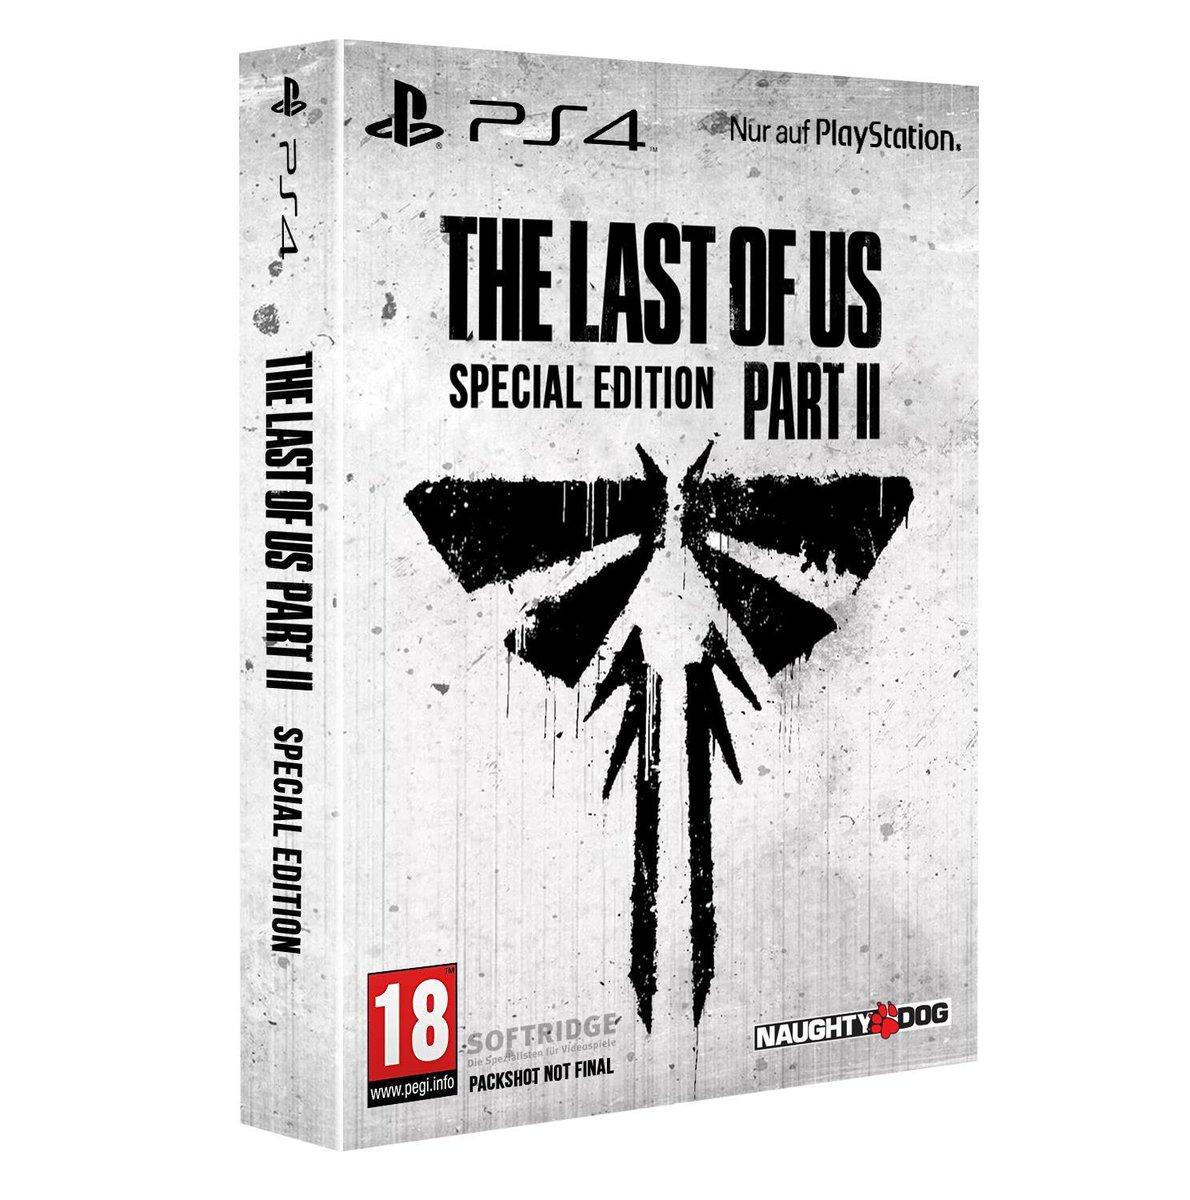 the last of us part 2 limited edition steelbook